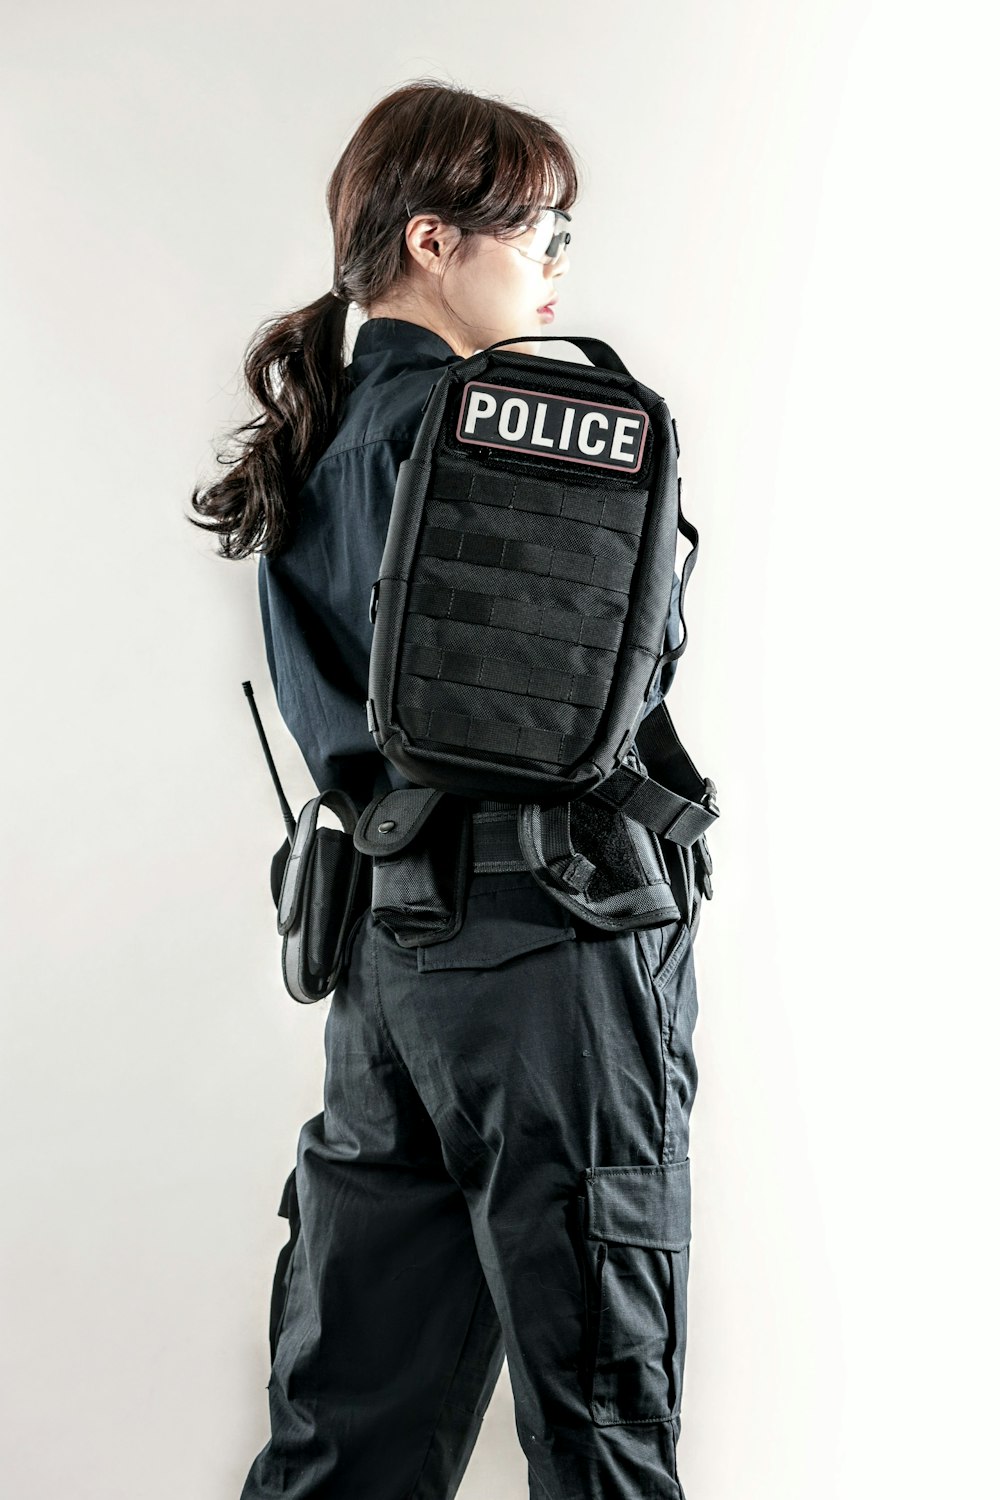 a woman in a police uniform is posing for a picture